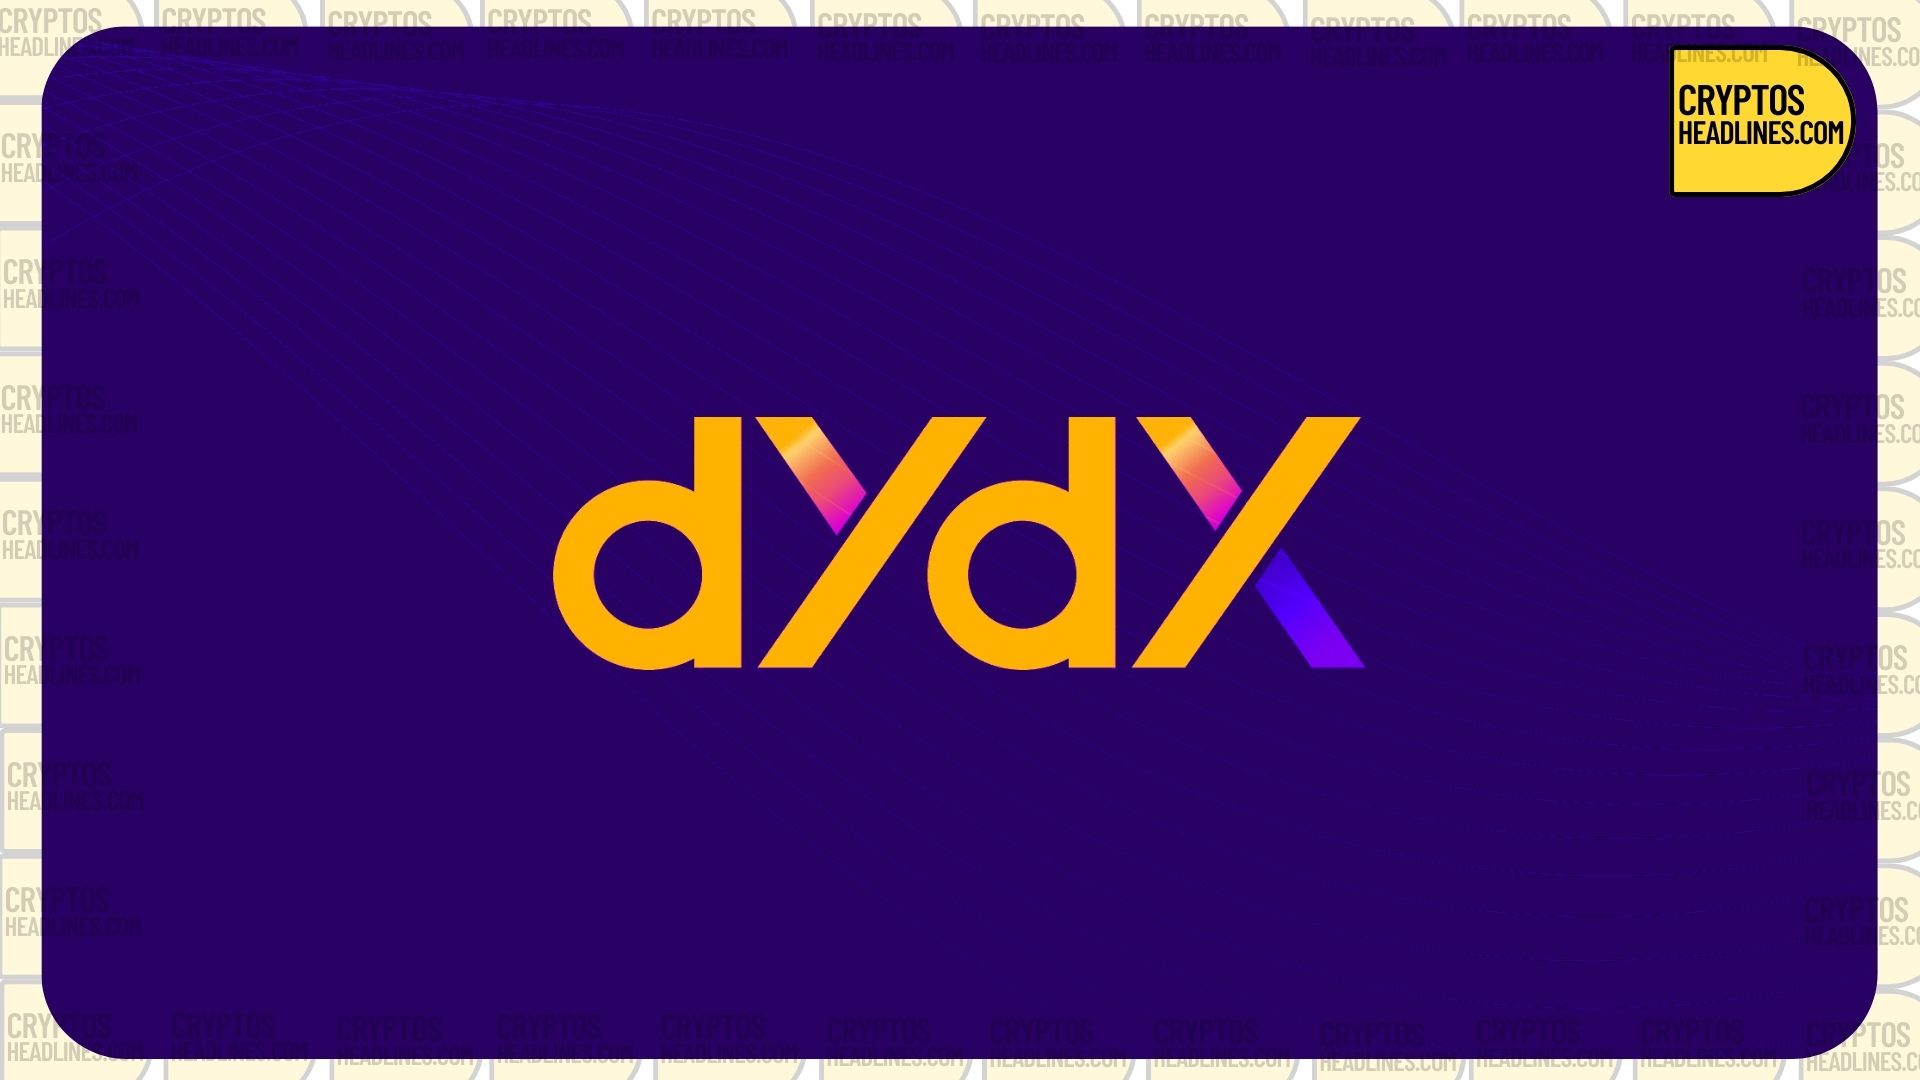 DYDX CEO Antonio Juliano Steps Down; Prompting Company Transition